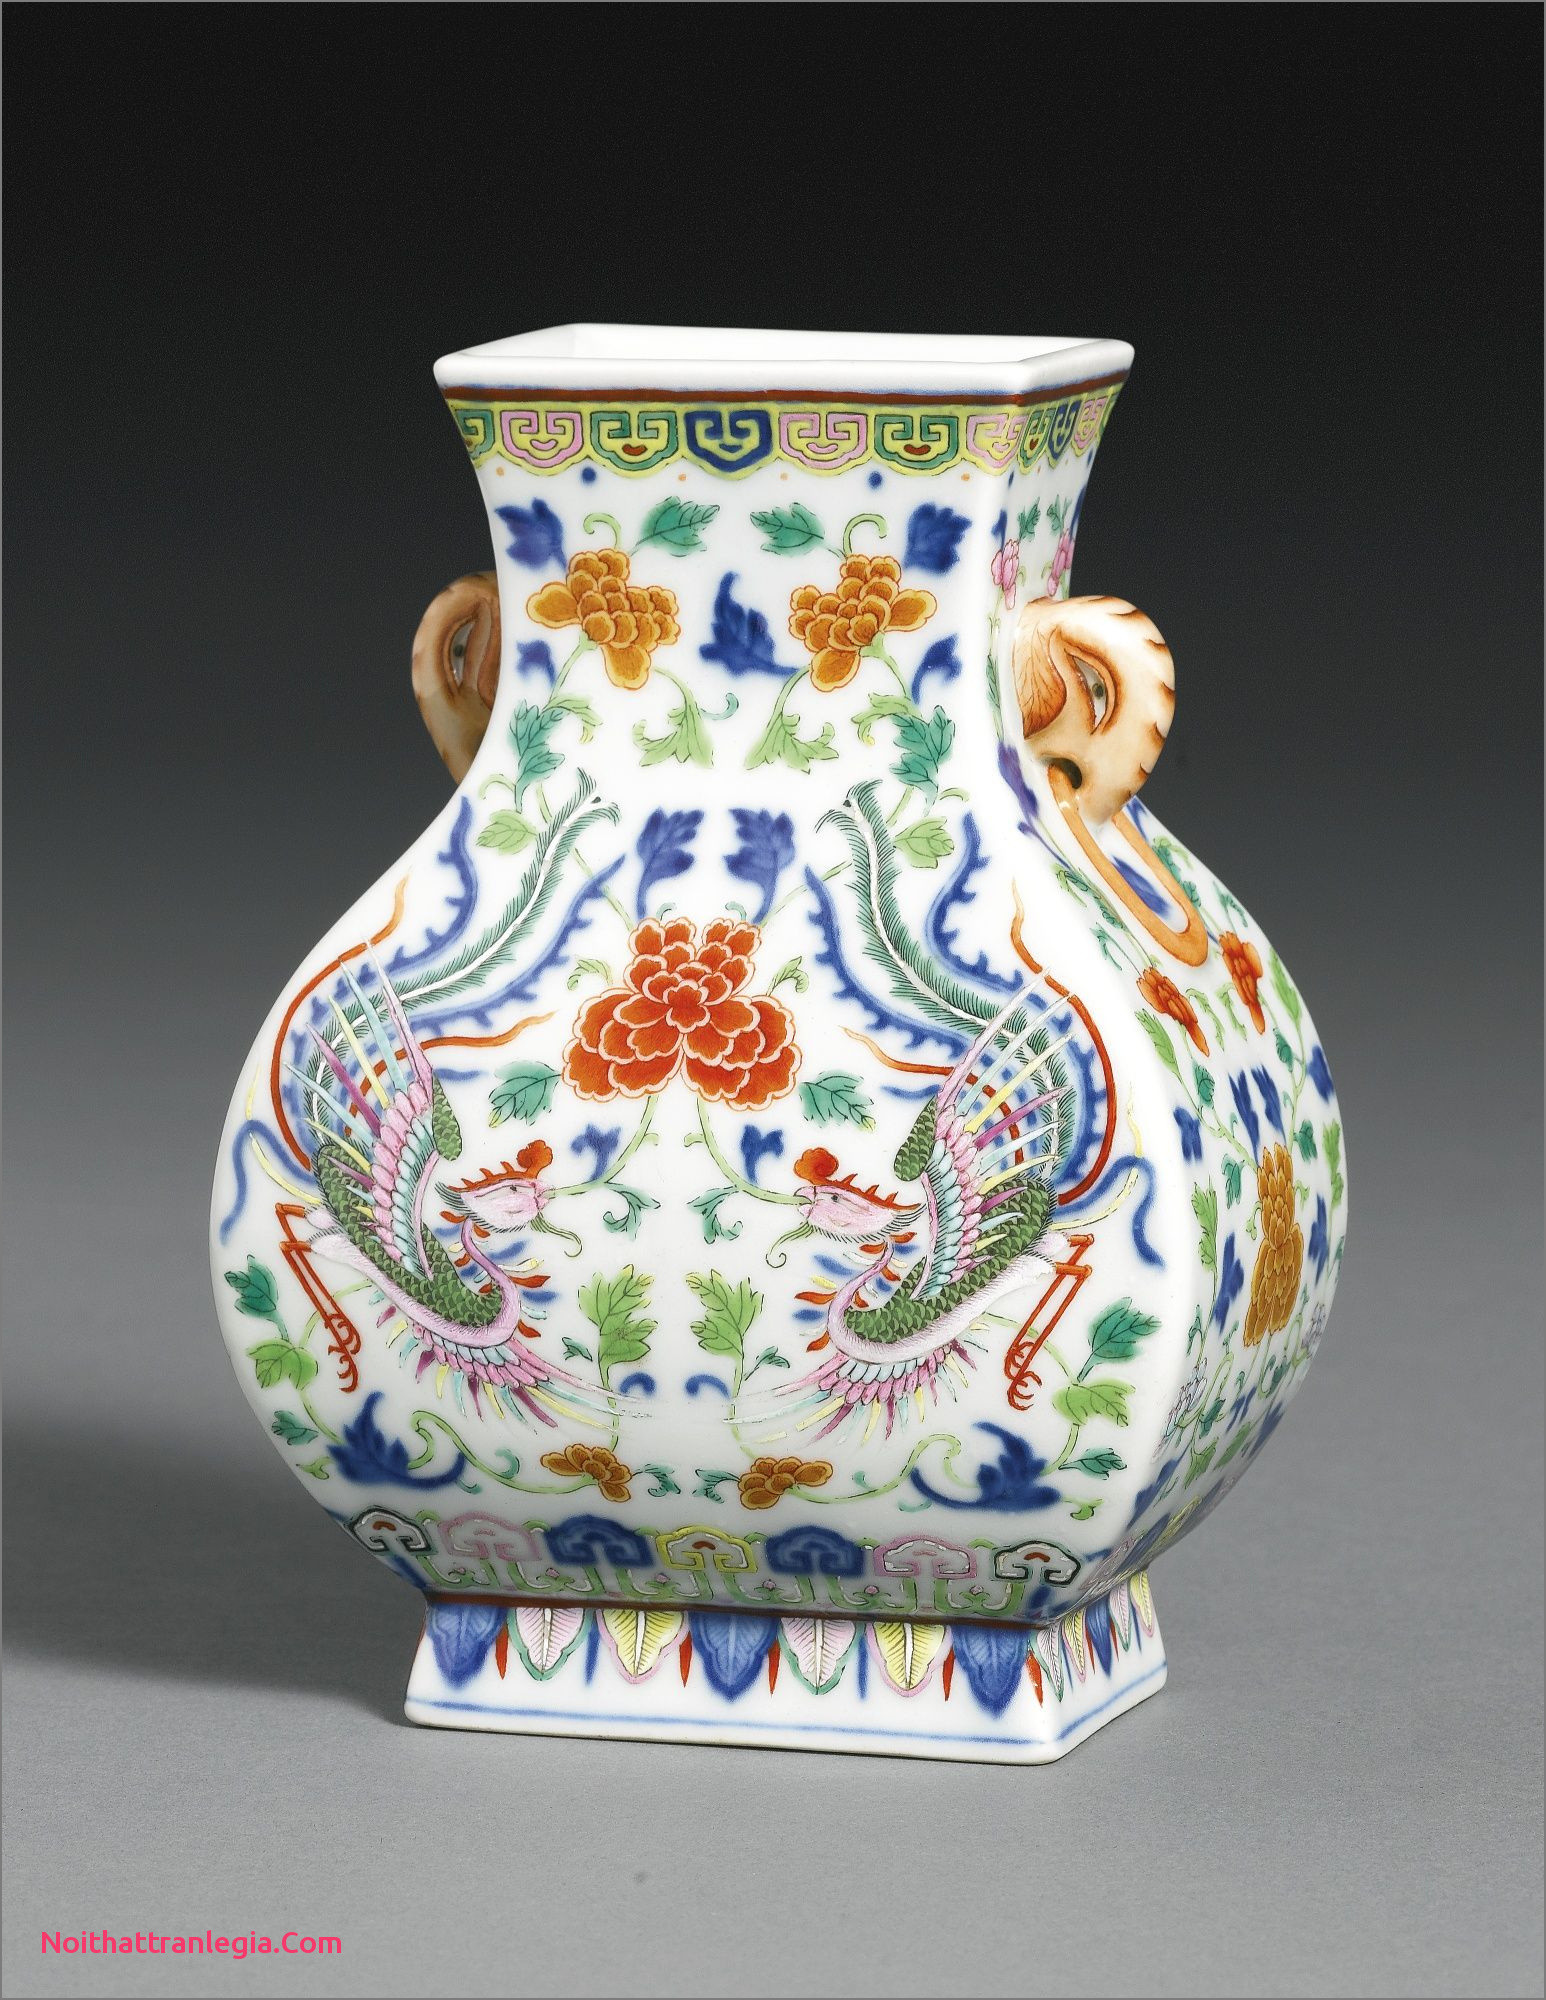 21 Awesome Waterford Blue Vase 2024 free download waterford blue vase of 20 chinese antique vase noithattranlegia vases design with regard to a fine and rare underglaze blue polychrome enamel phoenix vase fangu qianlong seal mark and period